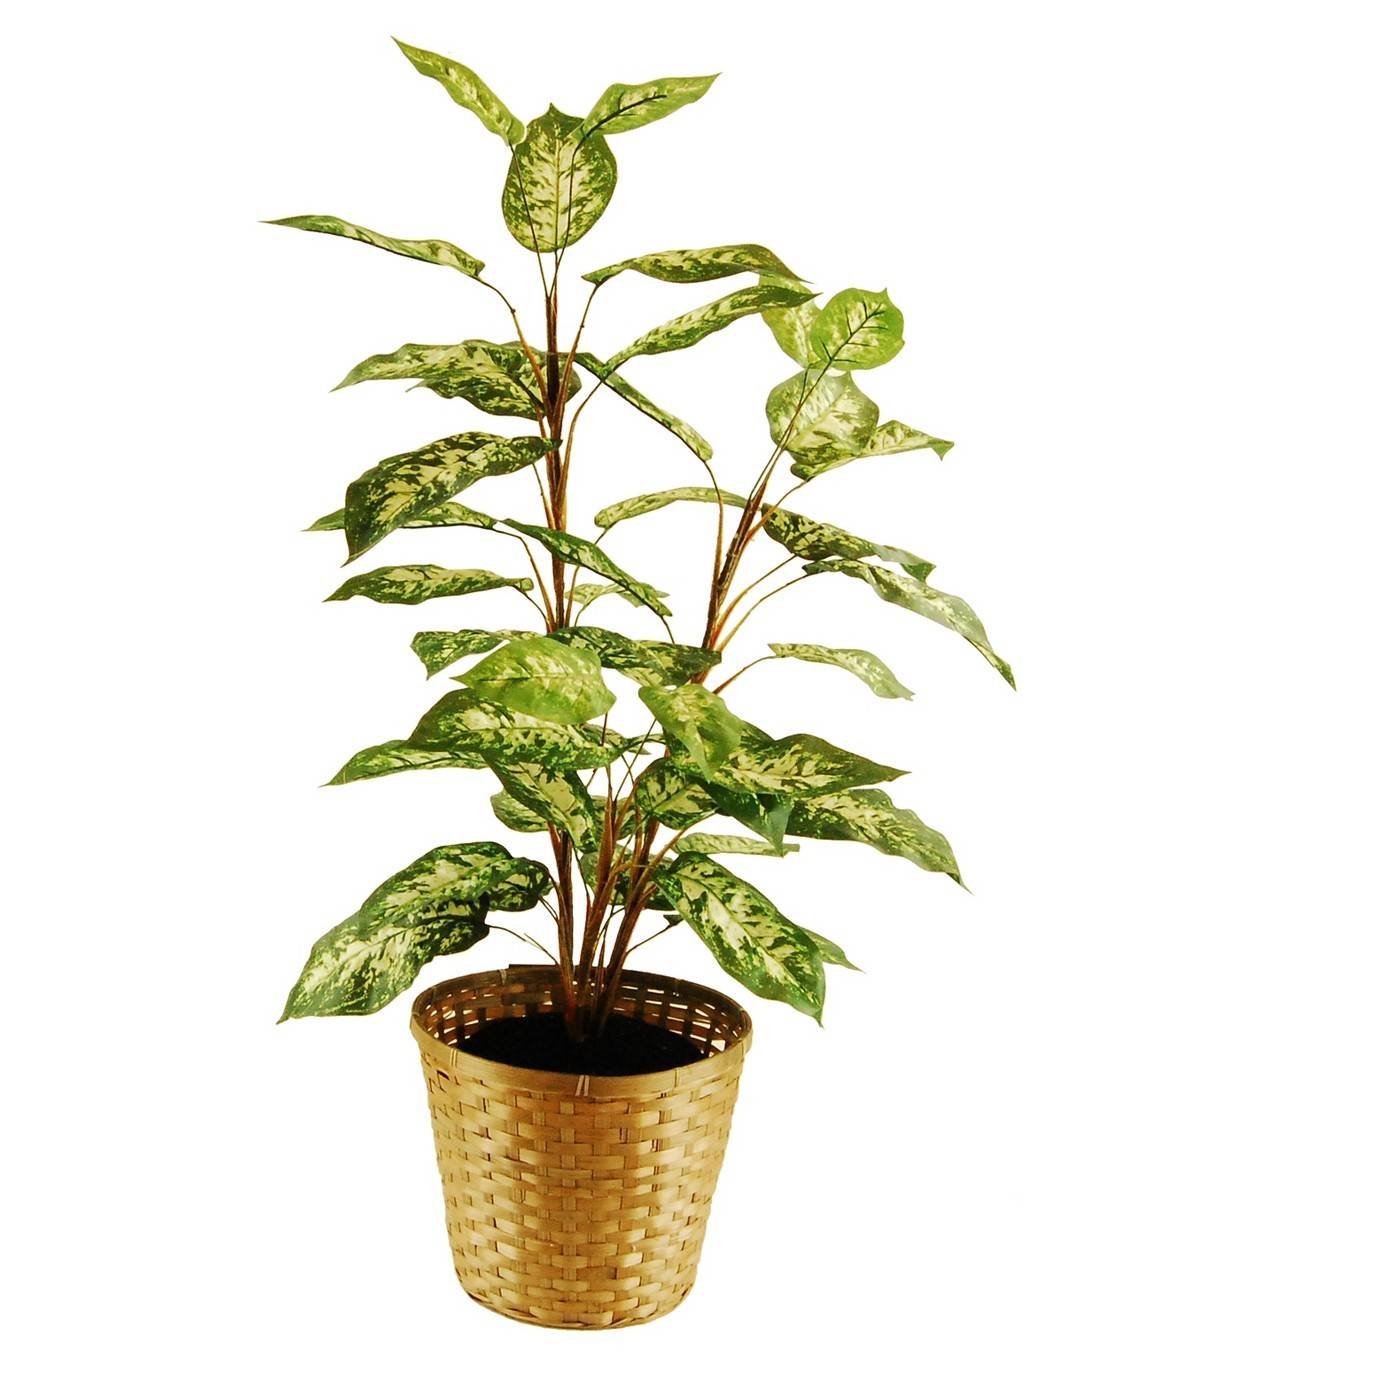 A plant has a brown pot and green leaves.